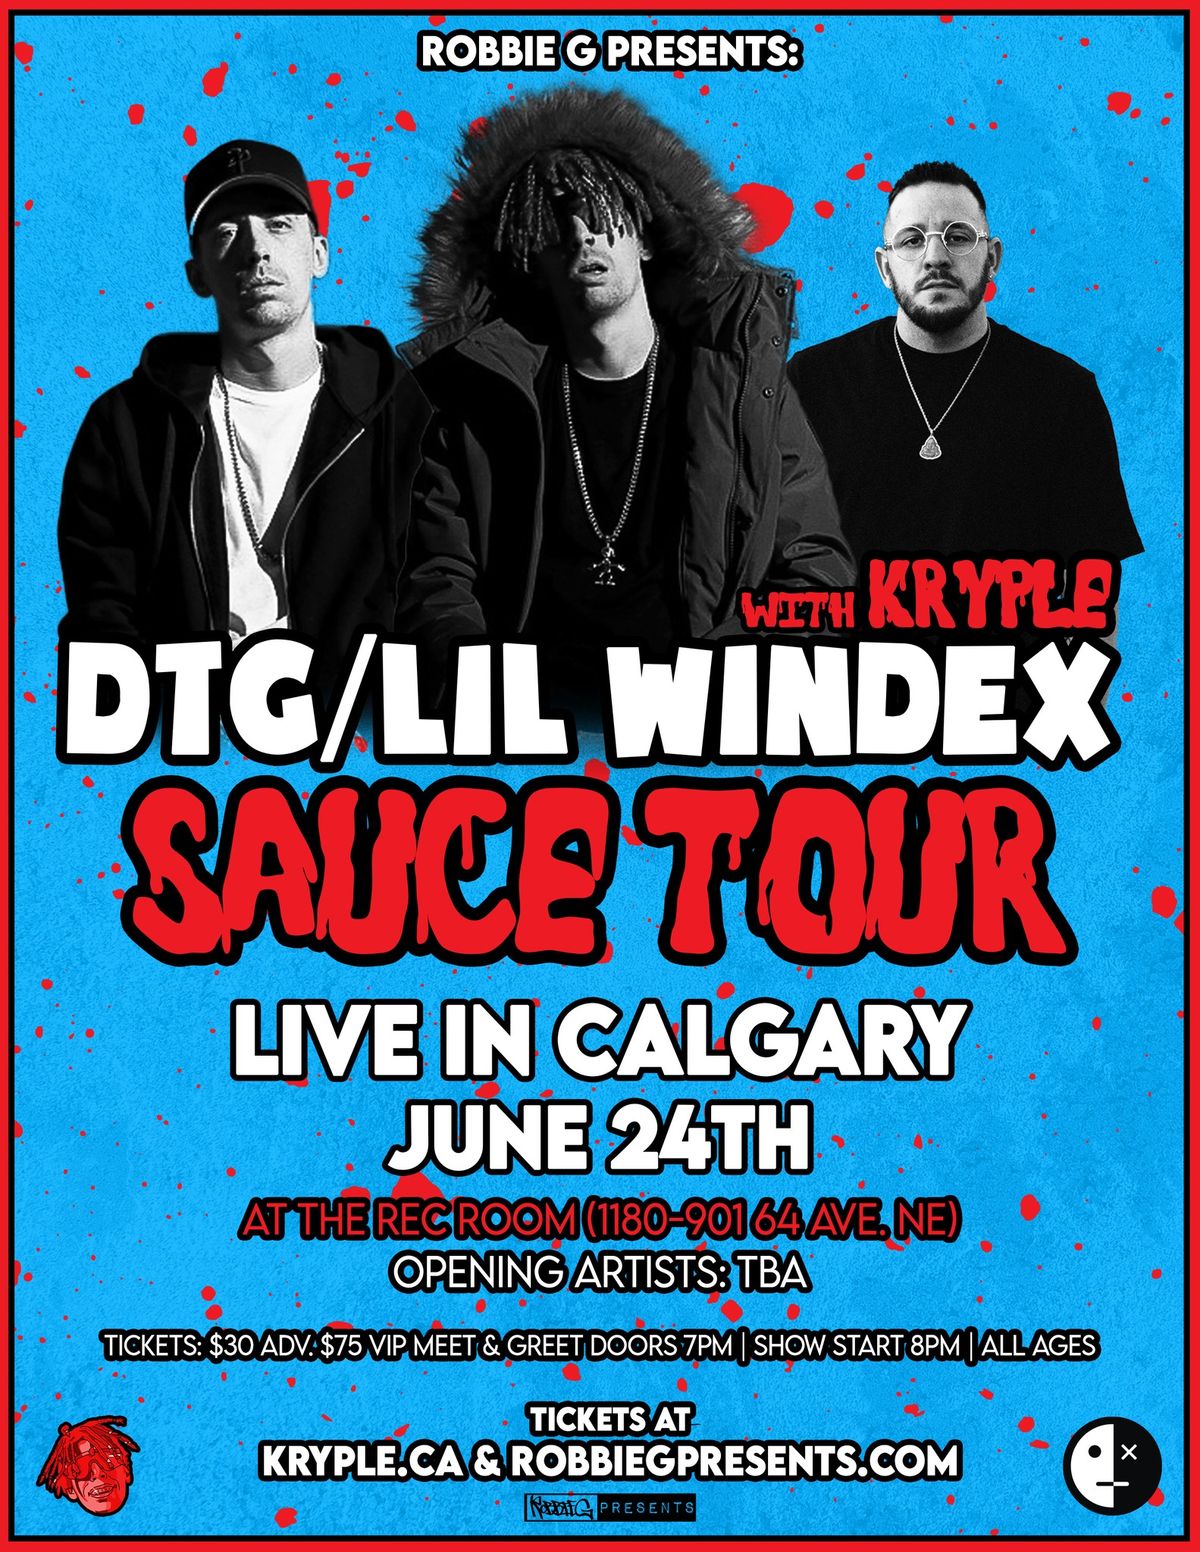 DTG\/Lil Windex Live in Calgary June 24th at The Rec Room with Kryple